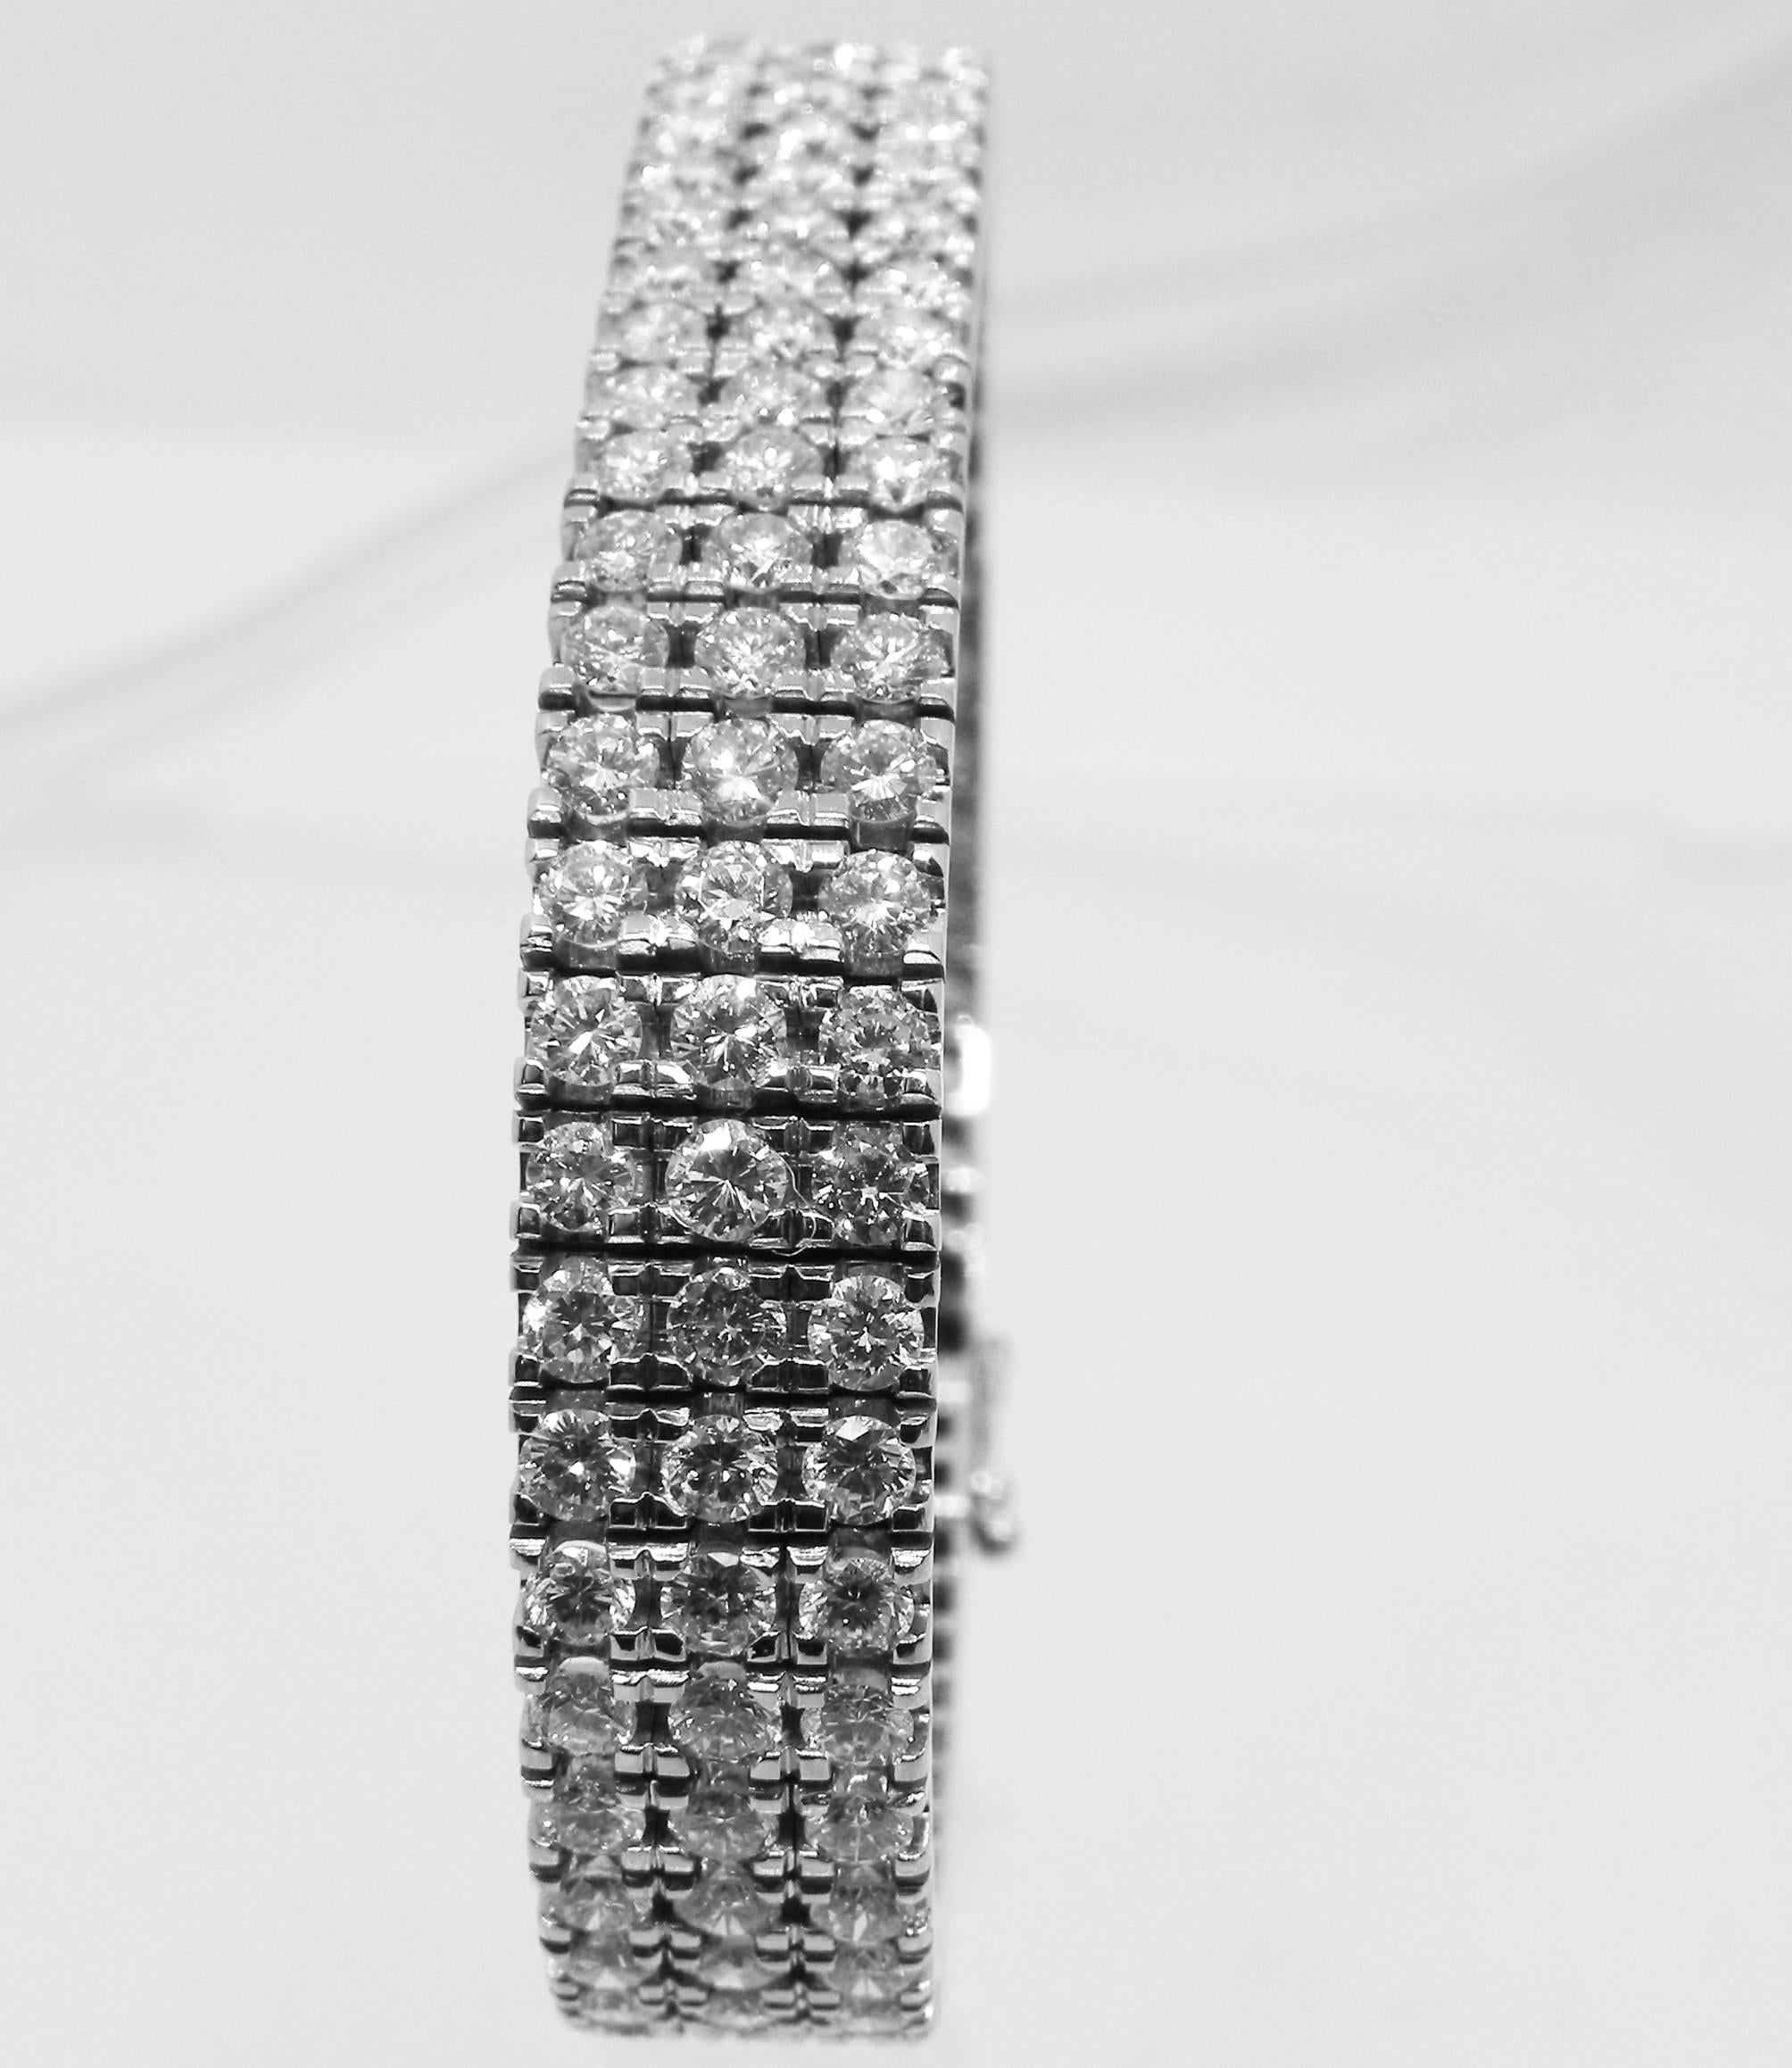 One-of-a-kind, Awesome Original 80's Three Lines Tennis Bracelet featuring 174 Brilliant Cut Top quality White Diamond, total weight 12.60 kt, 47.78 grams 18kt white gold setting.
Diamond's Quality is F-G VvS1
Total Lenght is 17.95 cm 